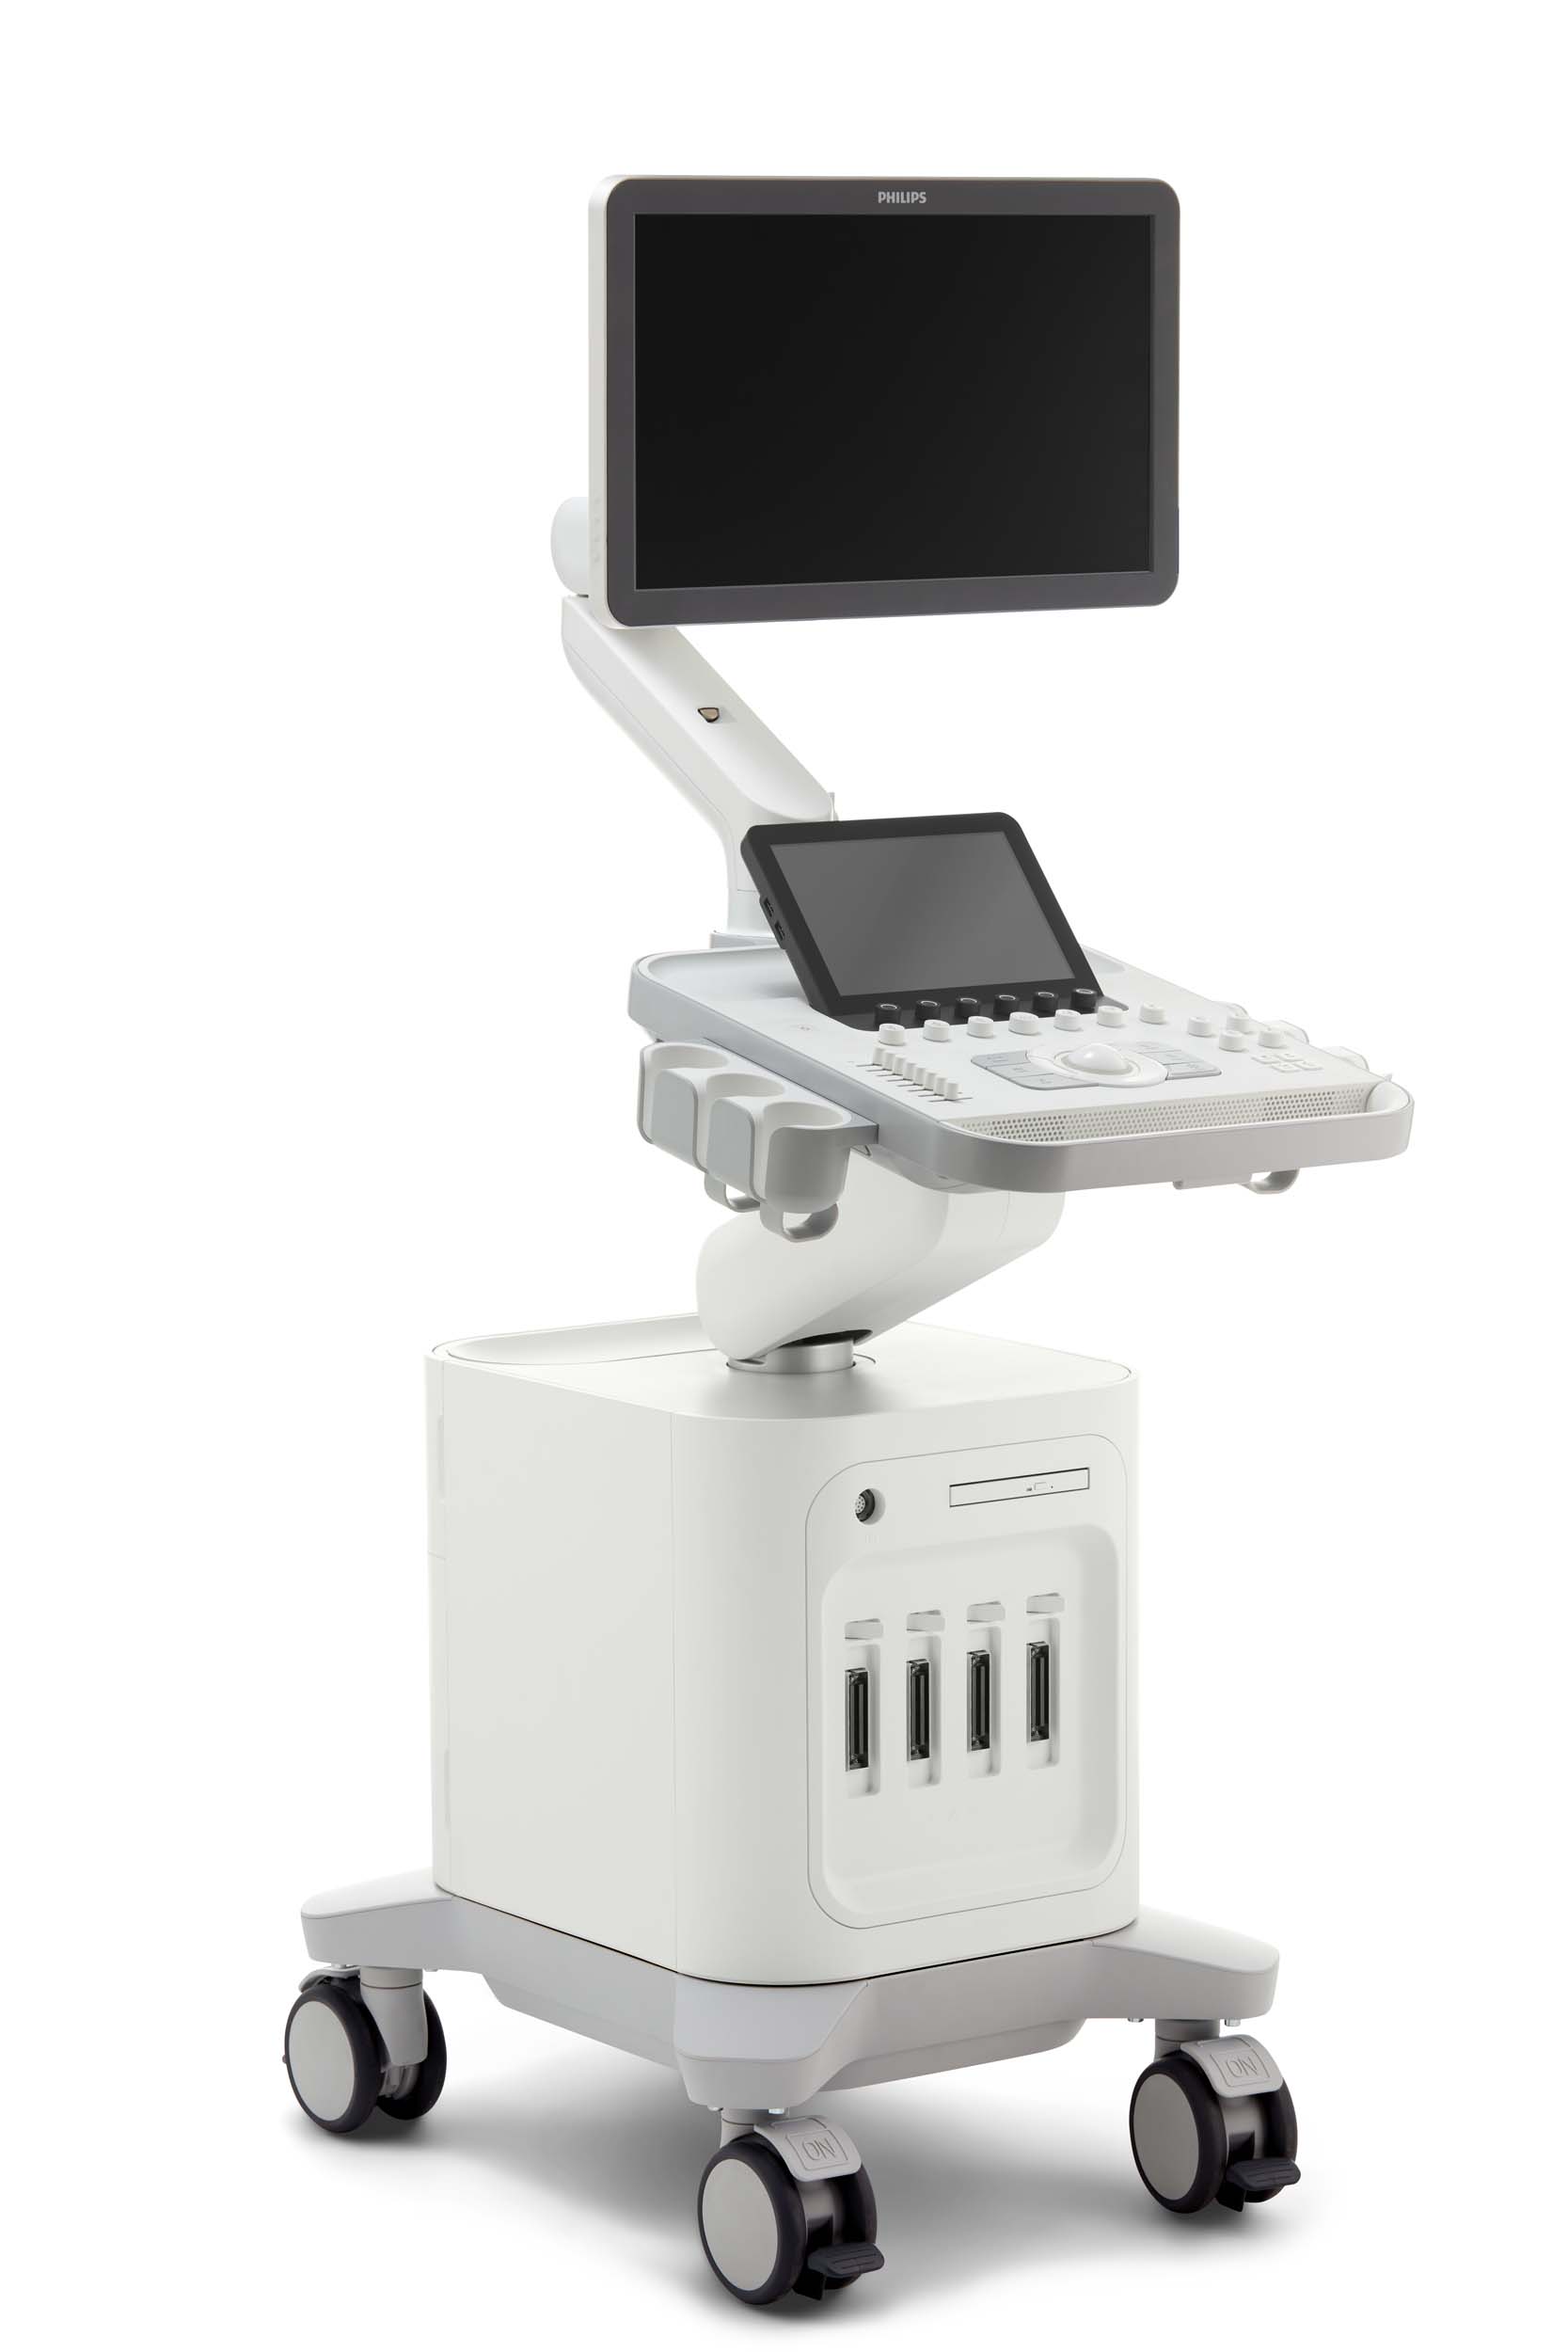 Philips Introduces Breakthrough Ultrasound 3300 System In India For